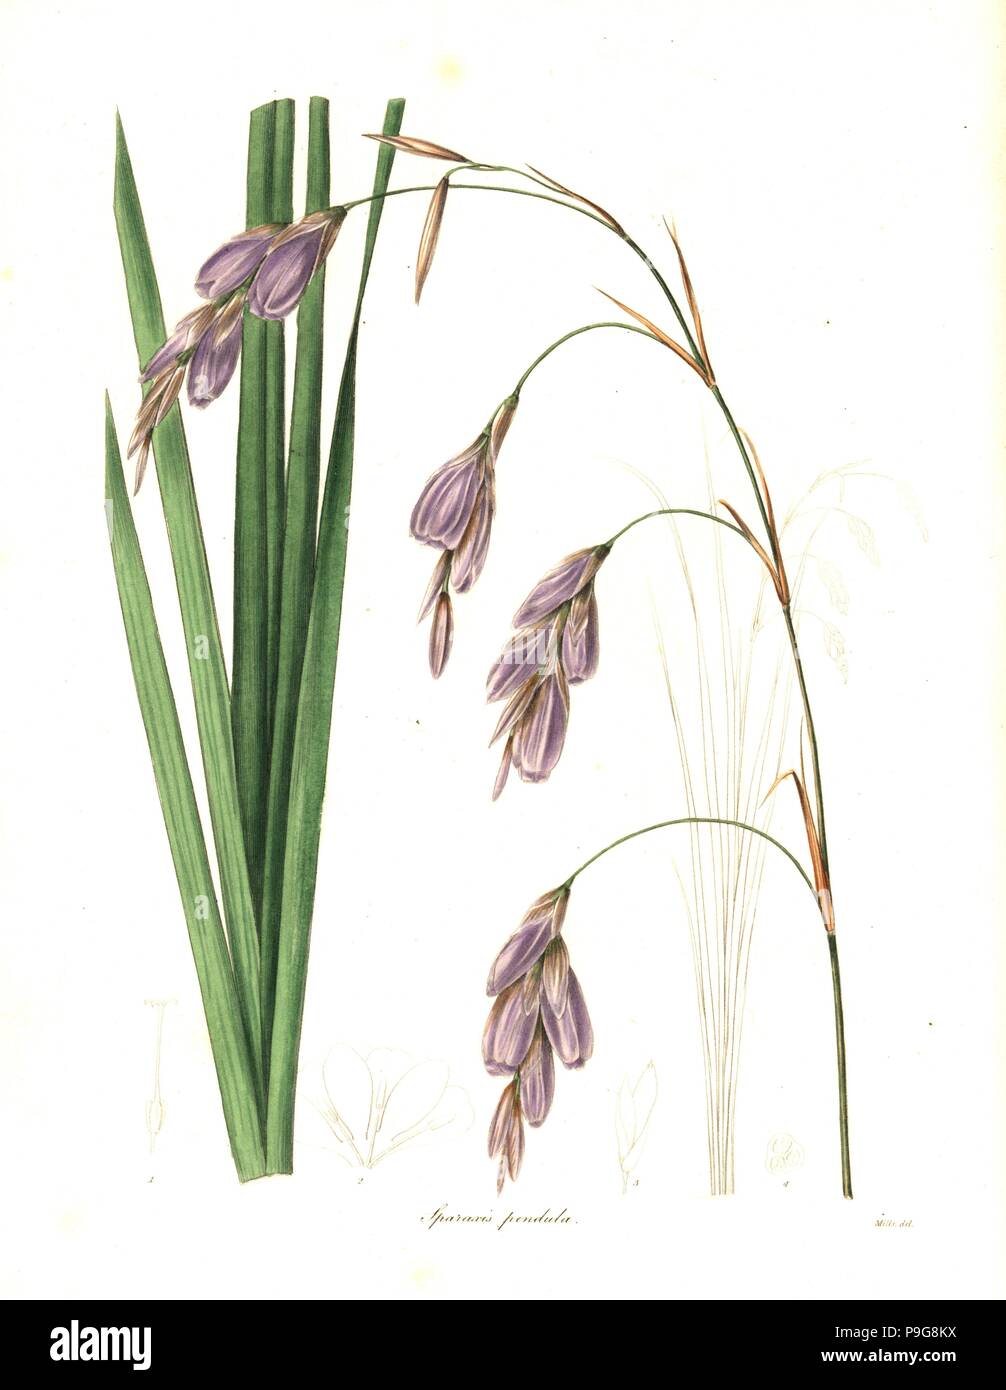 Fairy bell, Dierama pendulum (Pendulous-flowered sparaxis, Sparaxis pendula). Handcoloured copperplate engraving after a botanical illustration by Mills from Benjamin Maund and the Rev. John Stevens Henslow's The Botanist, London, 1836. Stock Photo